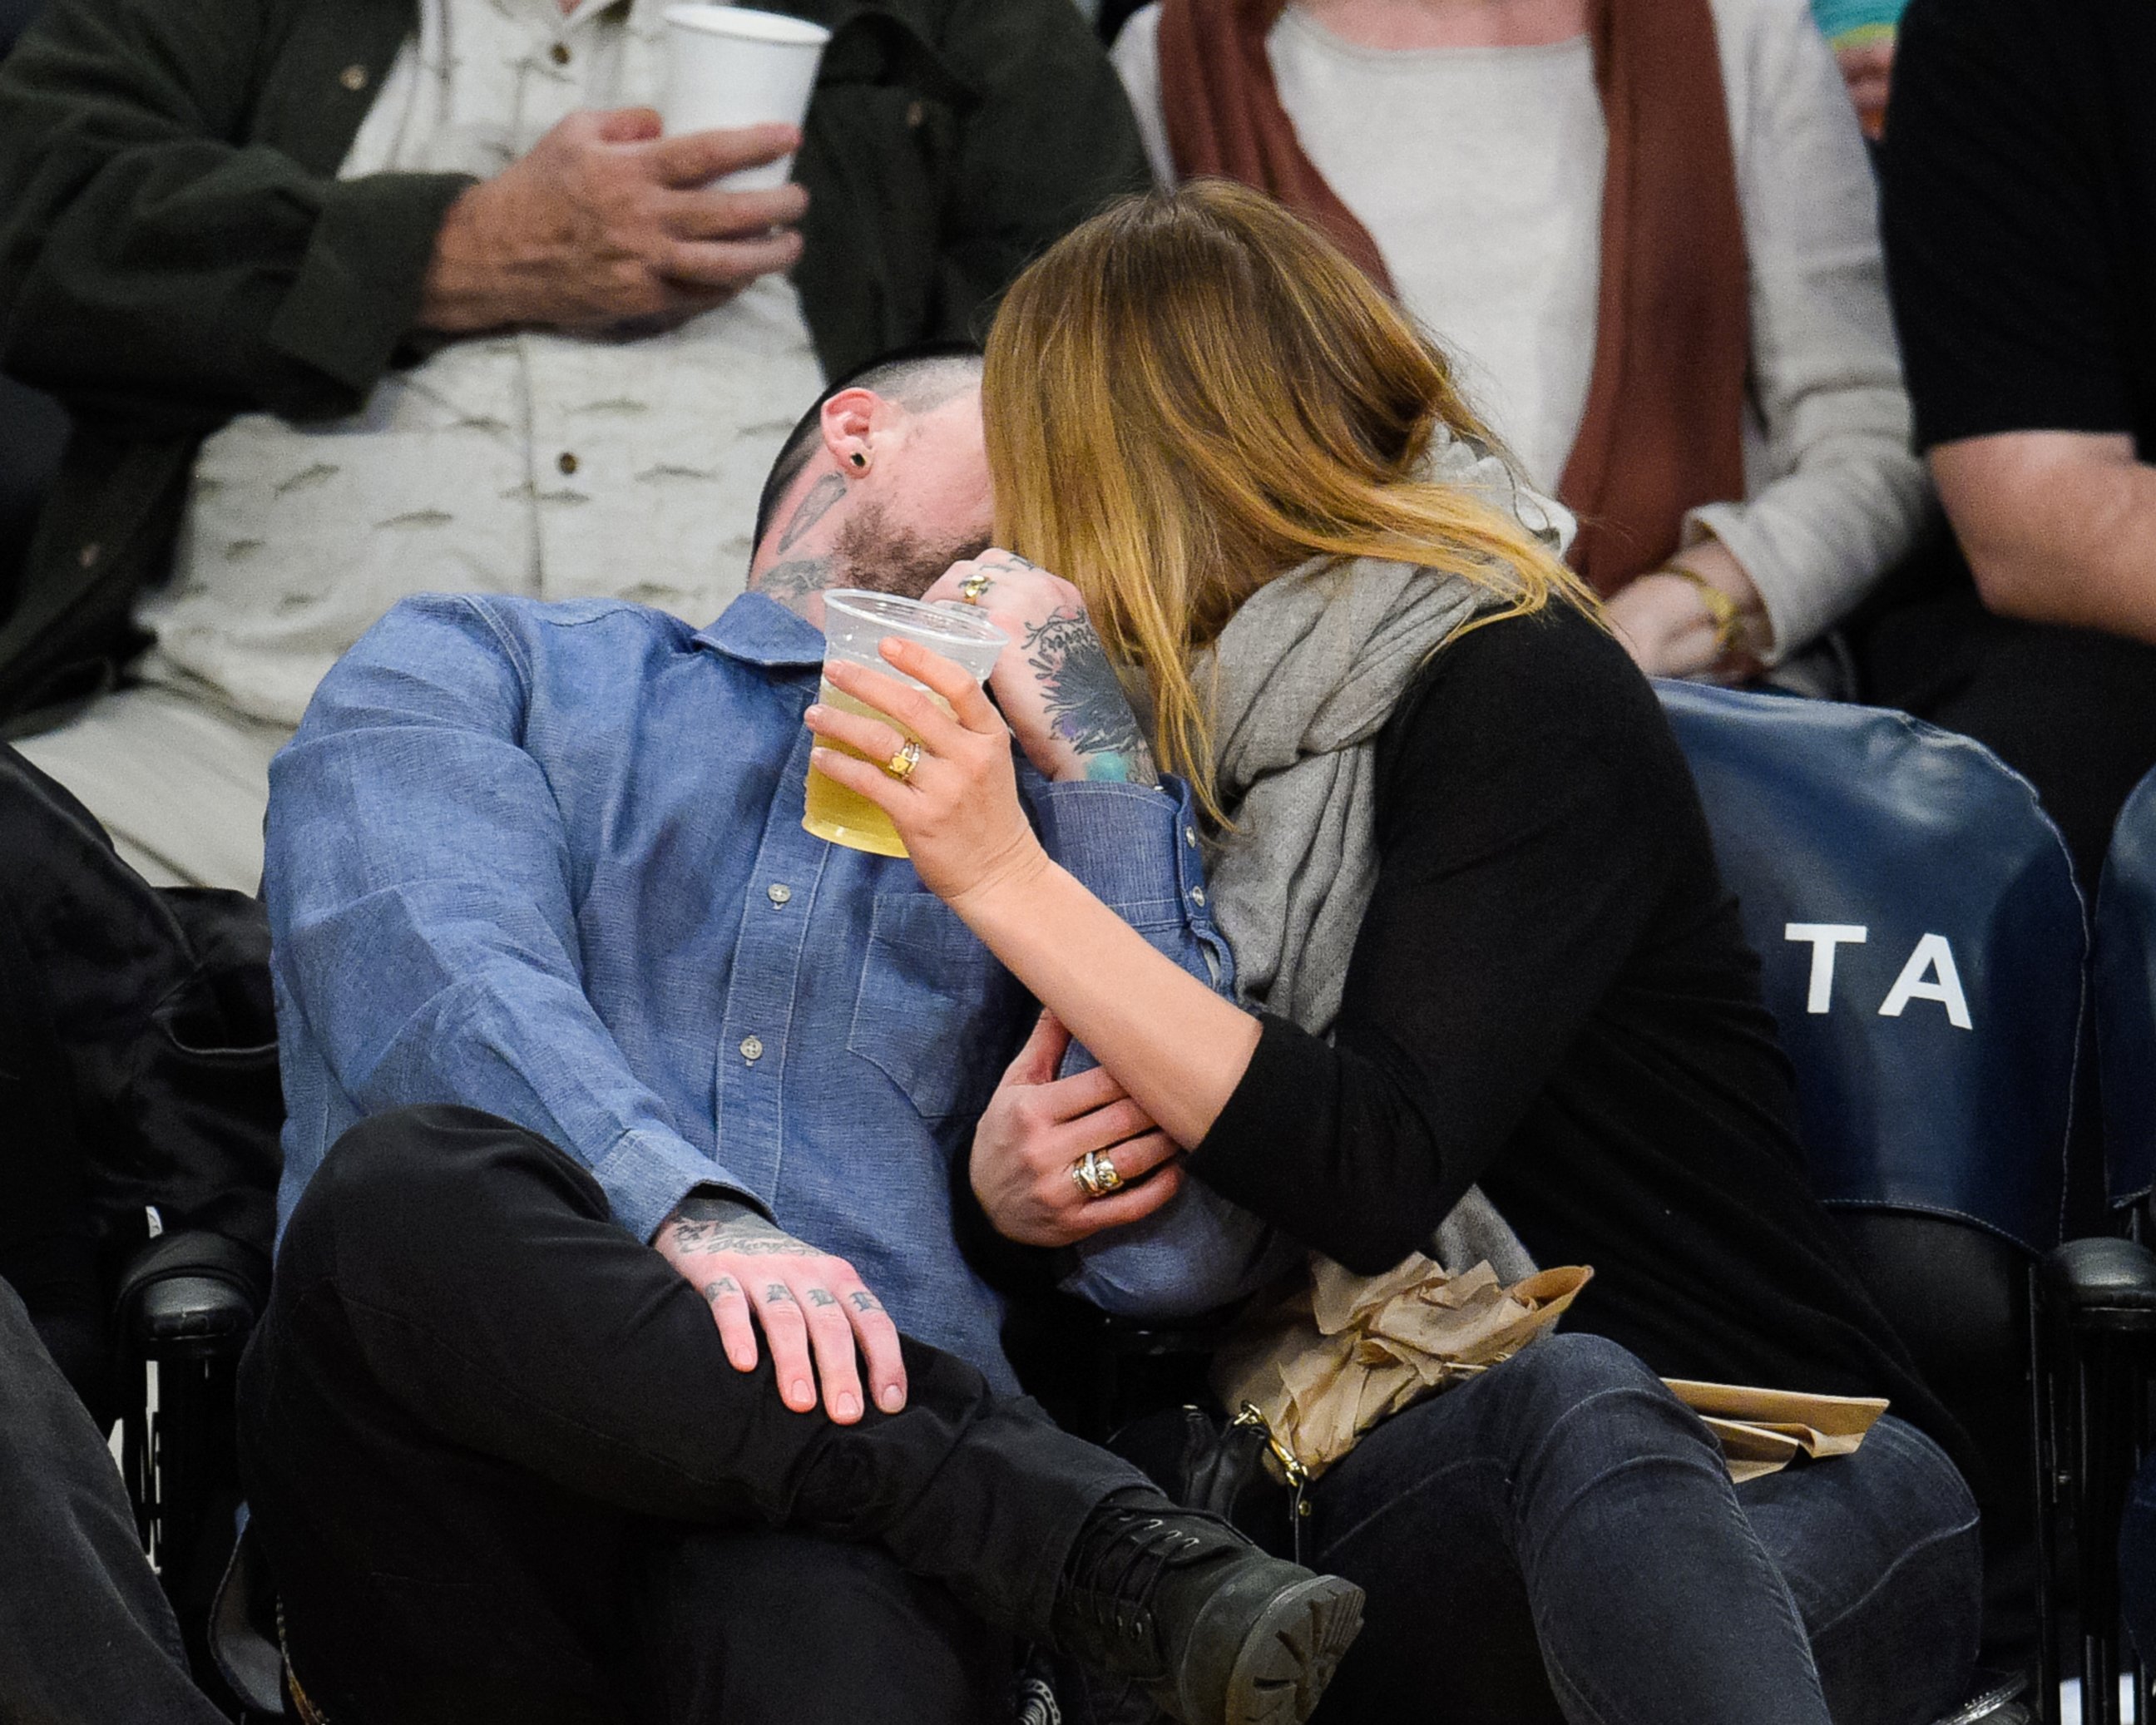 PHOTO: Benji Madden and Cameron Diaz kiss at a basketball game between the Washington Wizards and the Los Angeles Lakers at Staples Center, Jan. 27, 2015 in Los Angeles.